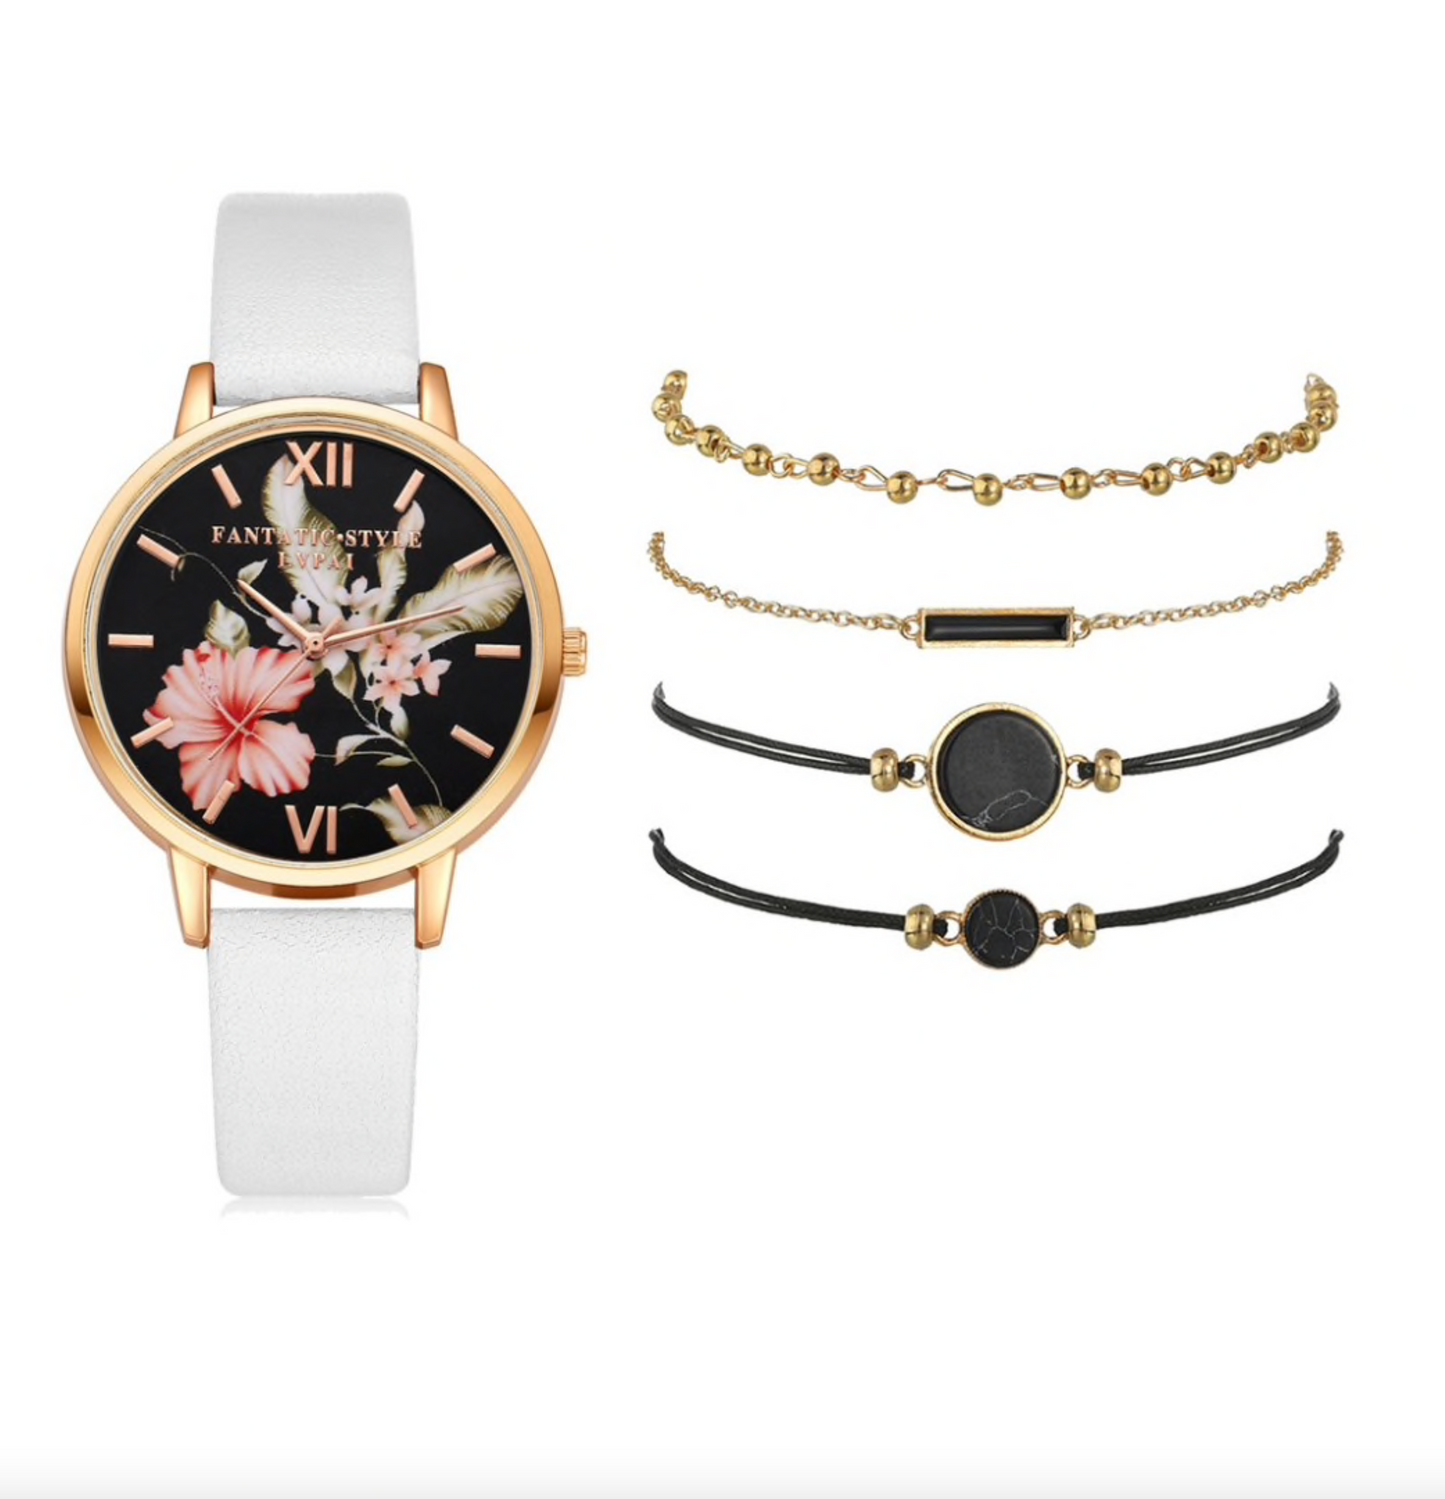 White Floral Modern Watch With Black Marbled Accents Bracelet Set